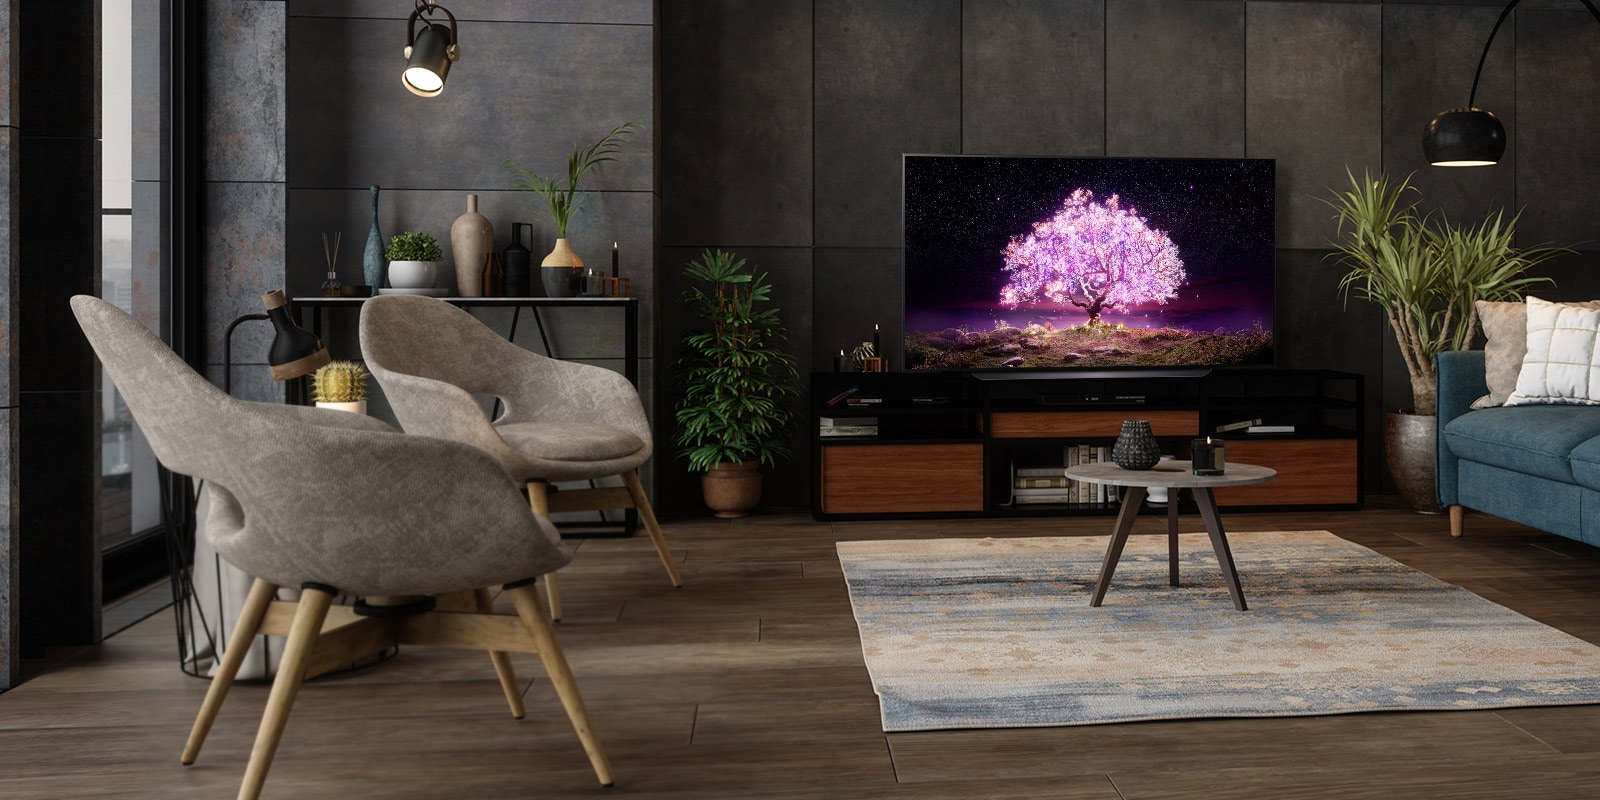 An OLED TV showing a tree emitting purple light in a luxurious house setting